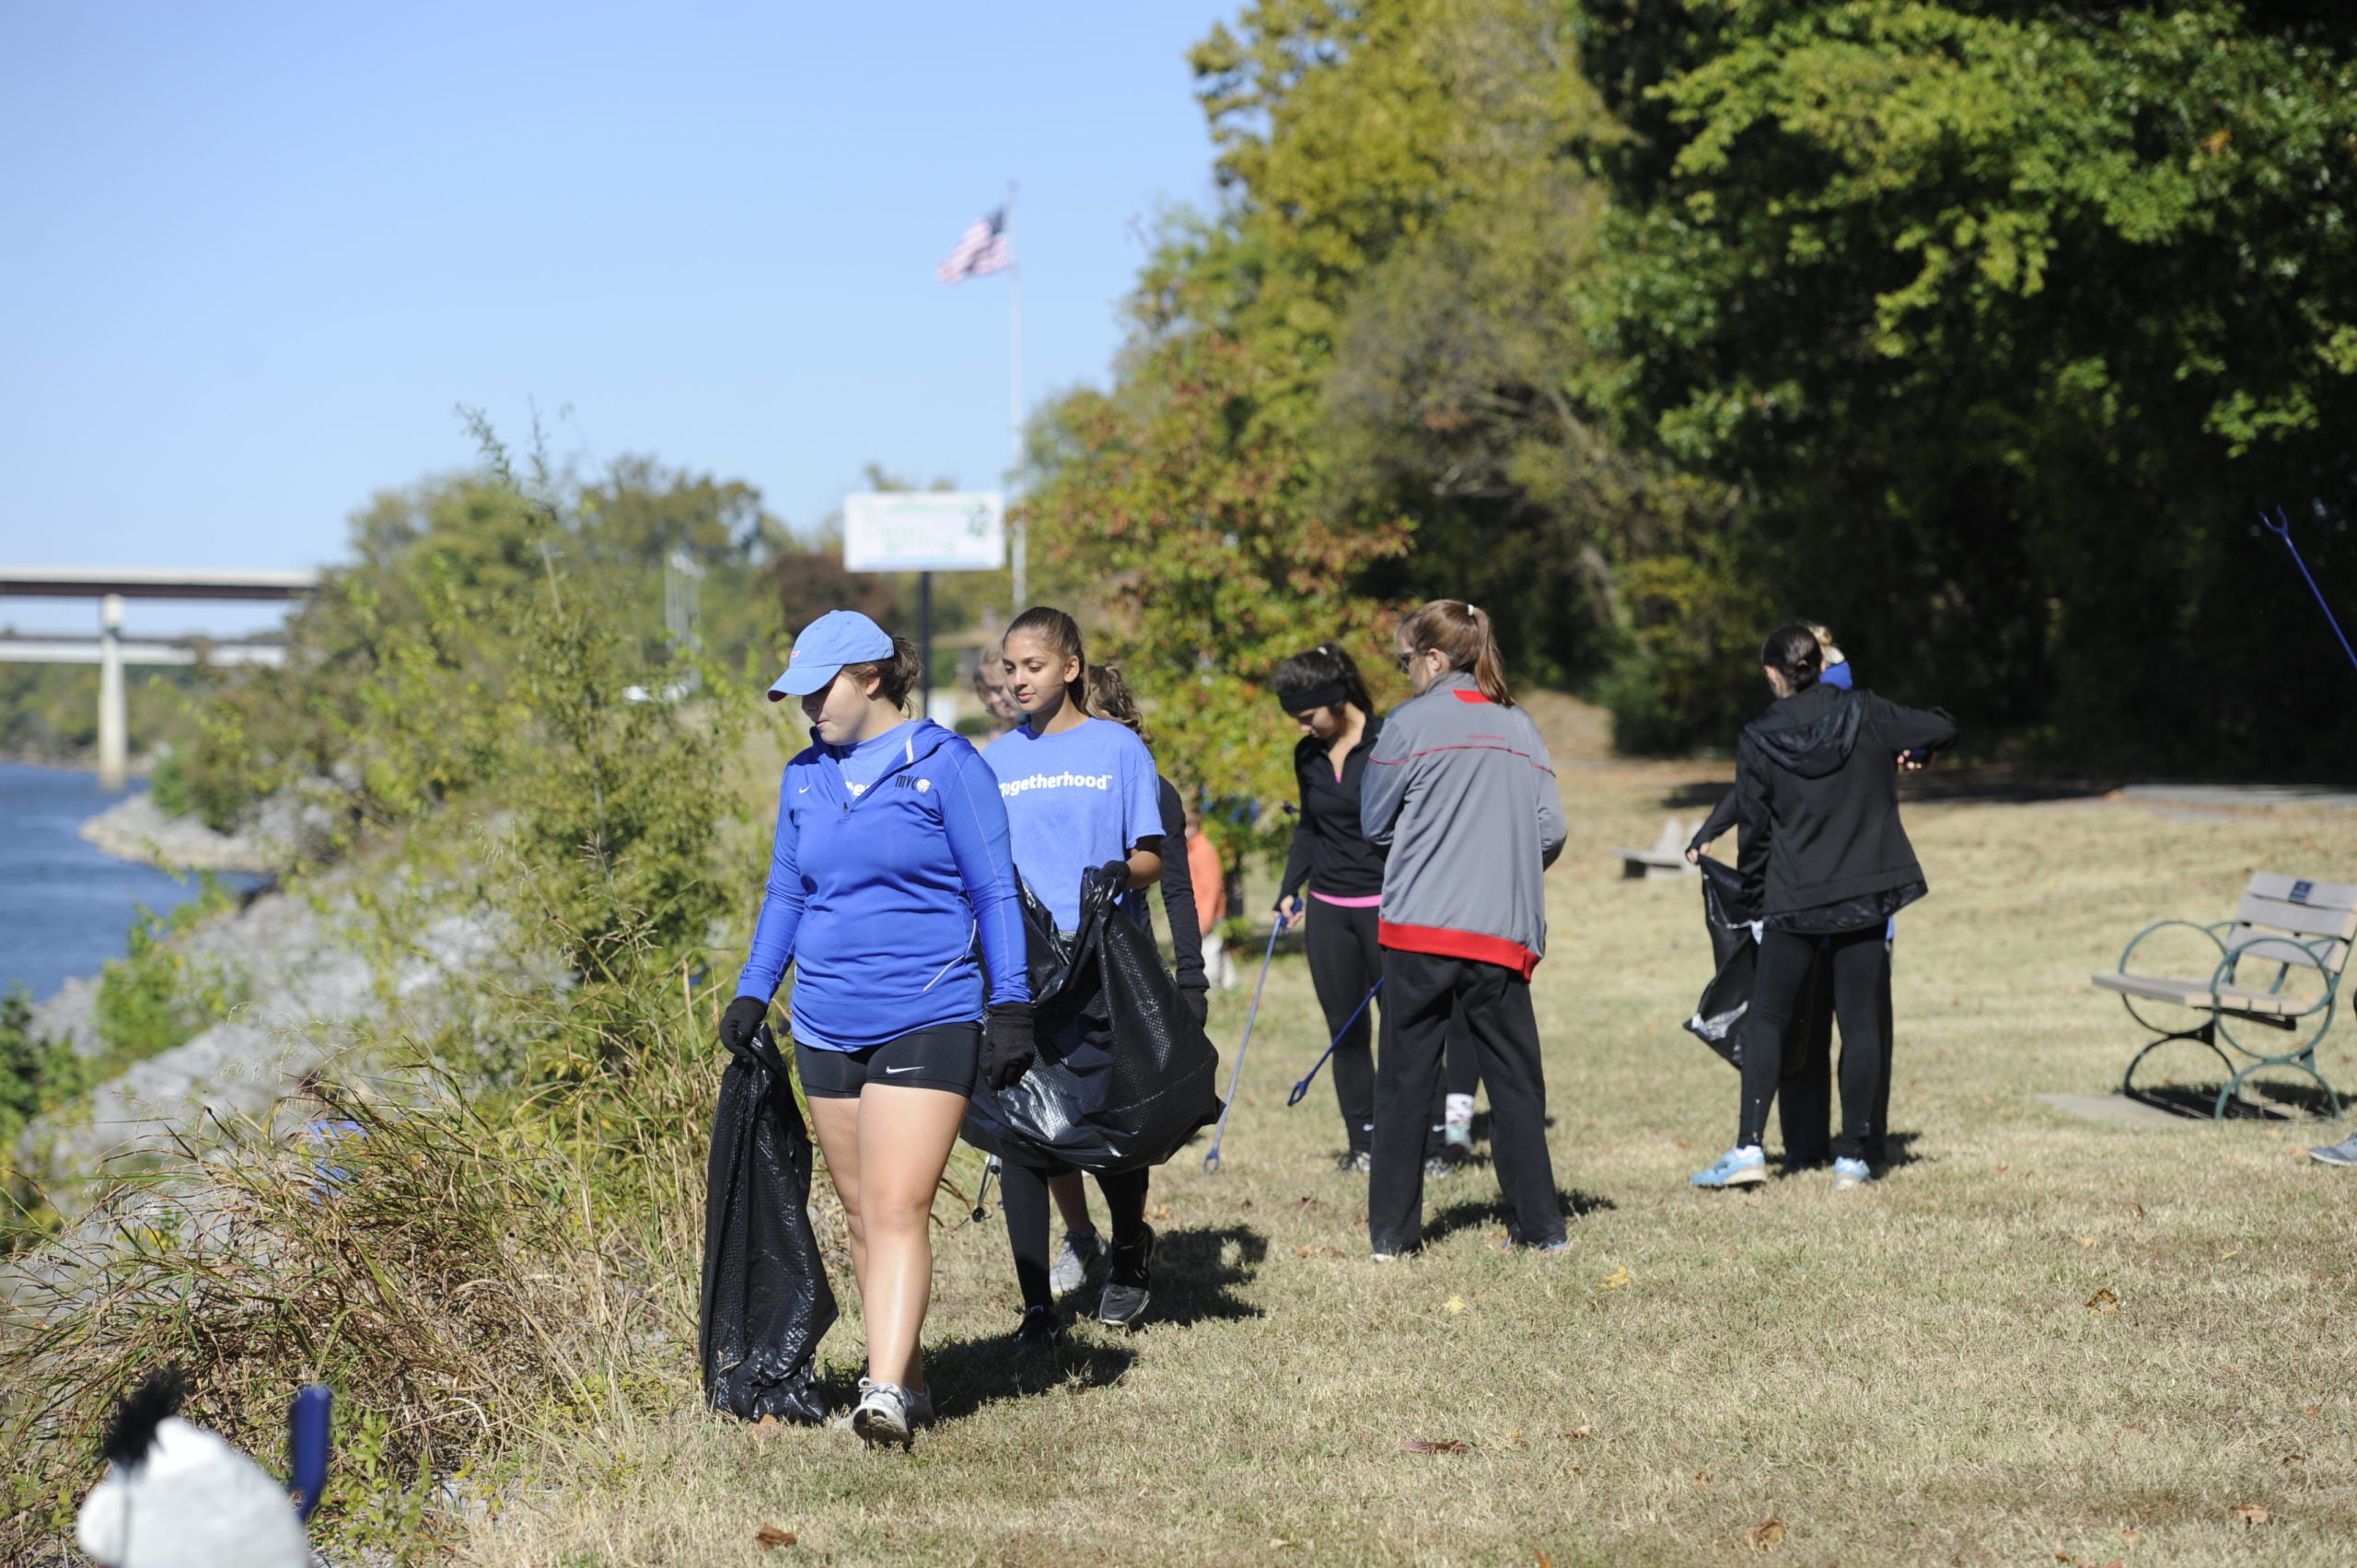 Volunteers work to clean up Ditto Landing during the Southeast YMCA Togetherhood Project on Saturday October 22, 2016 in Huntsville, Ala. (Eric Schultz / Rocket City Photo)